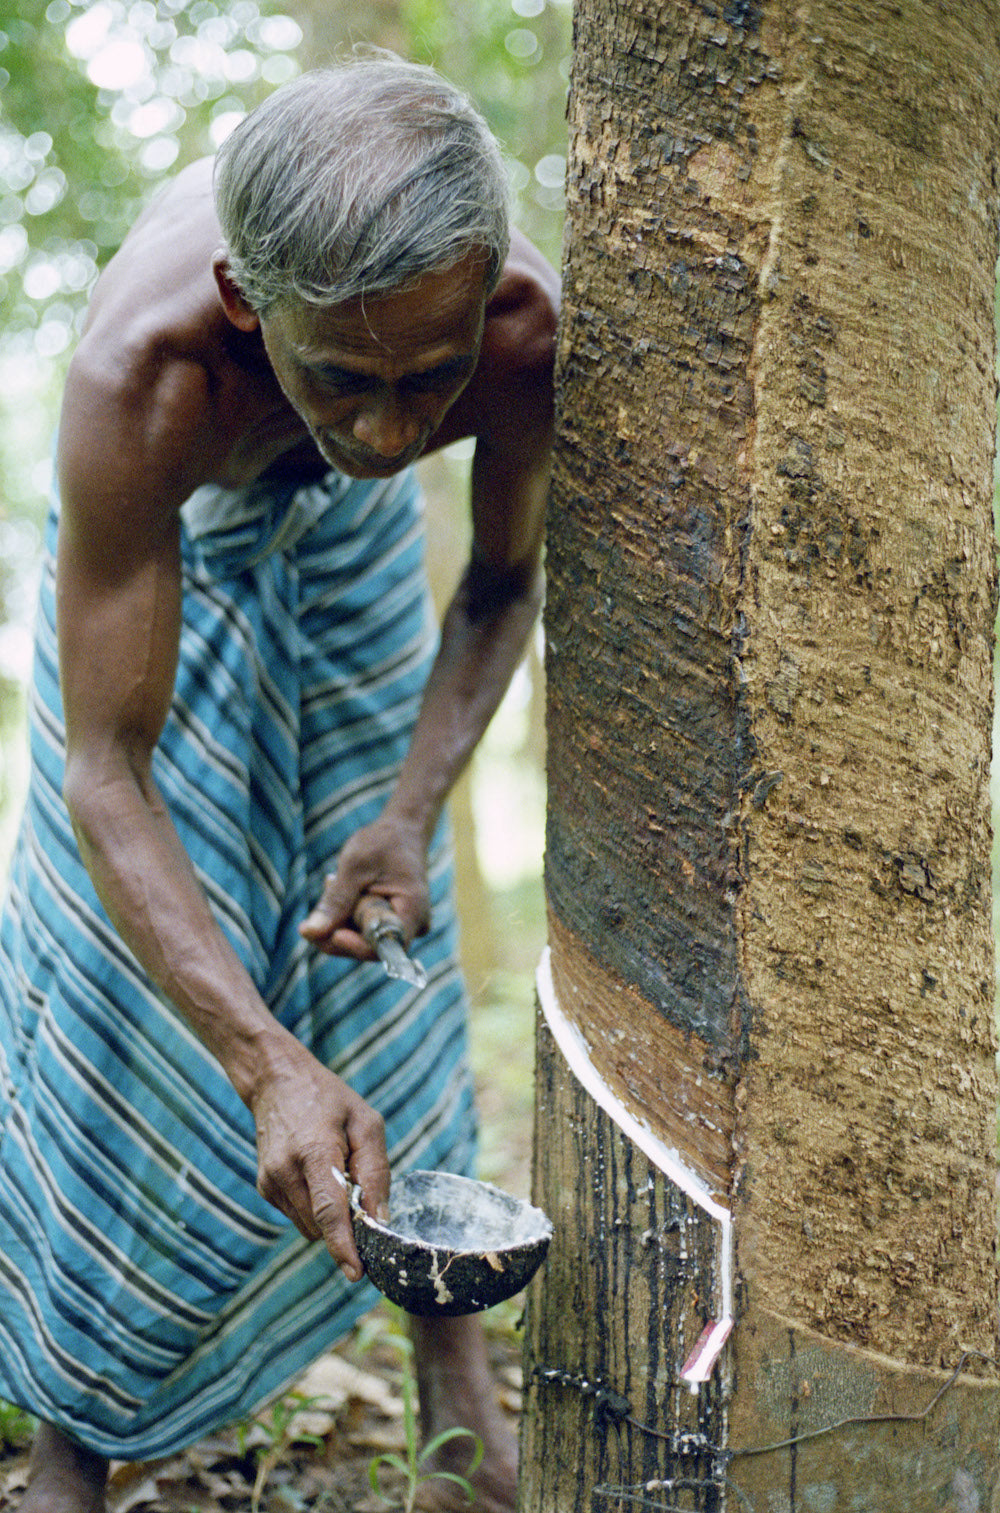 A man collecting white natural rubber latex from a tree. Photo from: WikimediaCommons by Salix Oculus - Own work, CC BY-SA 4.0